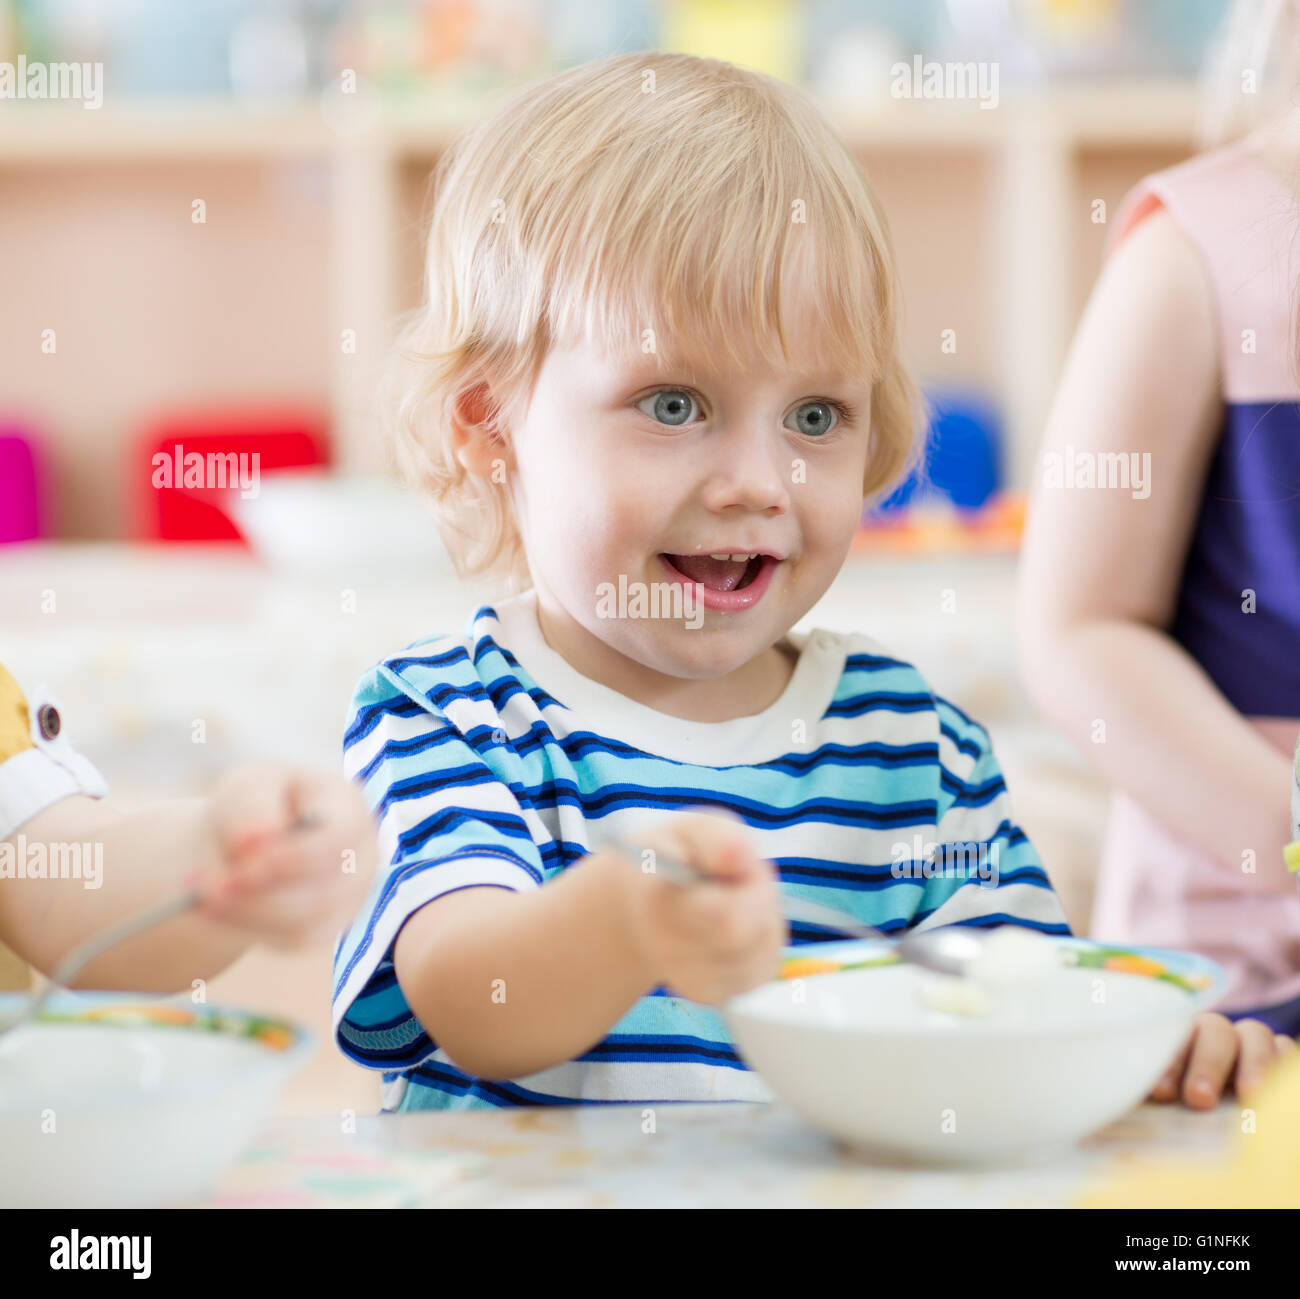 funny smiling kid eating from plate in kindergarten Stock Photo